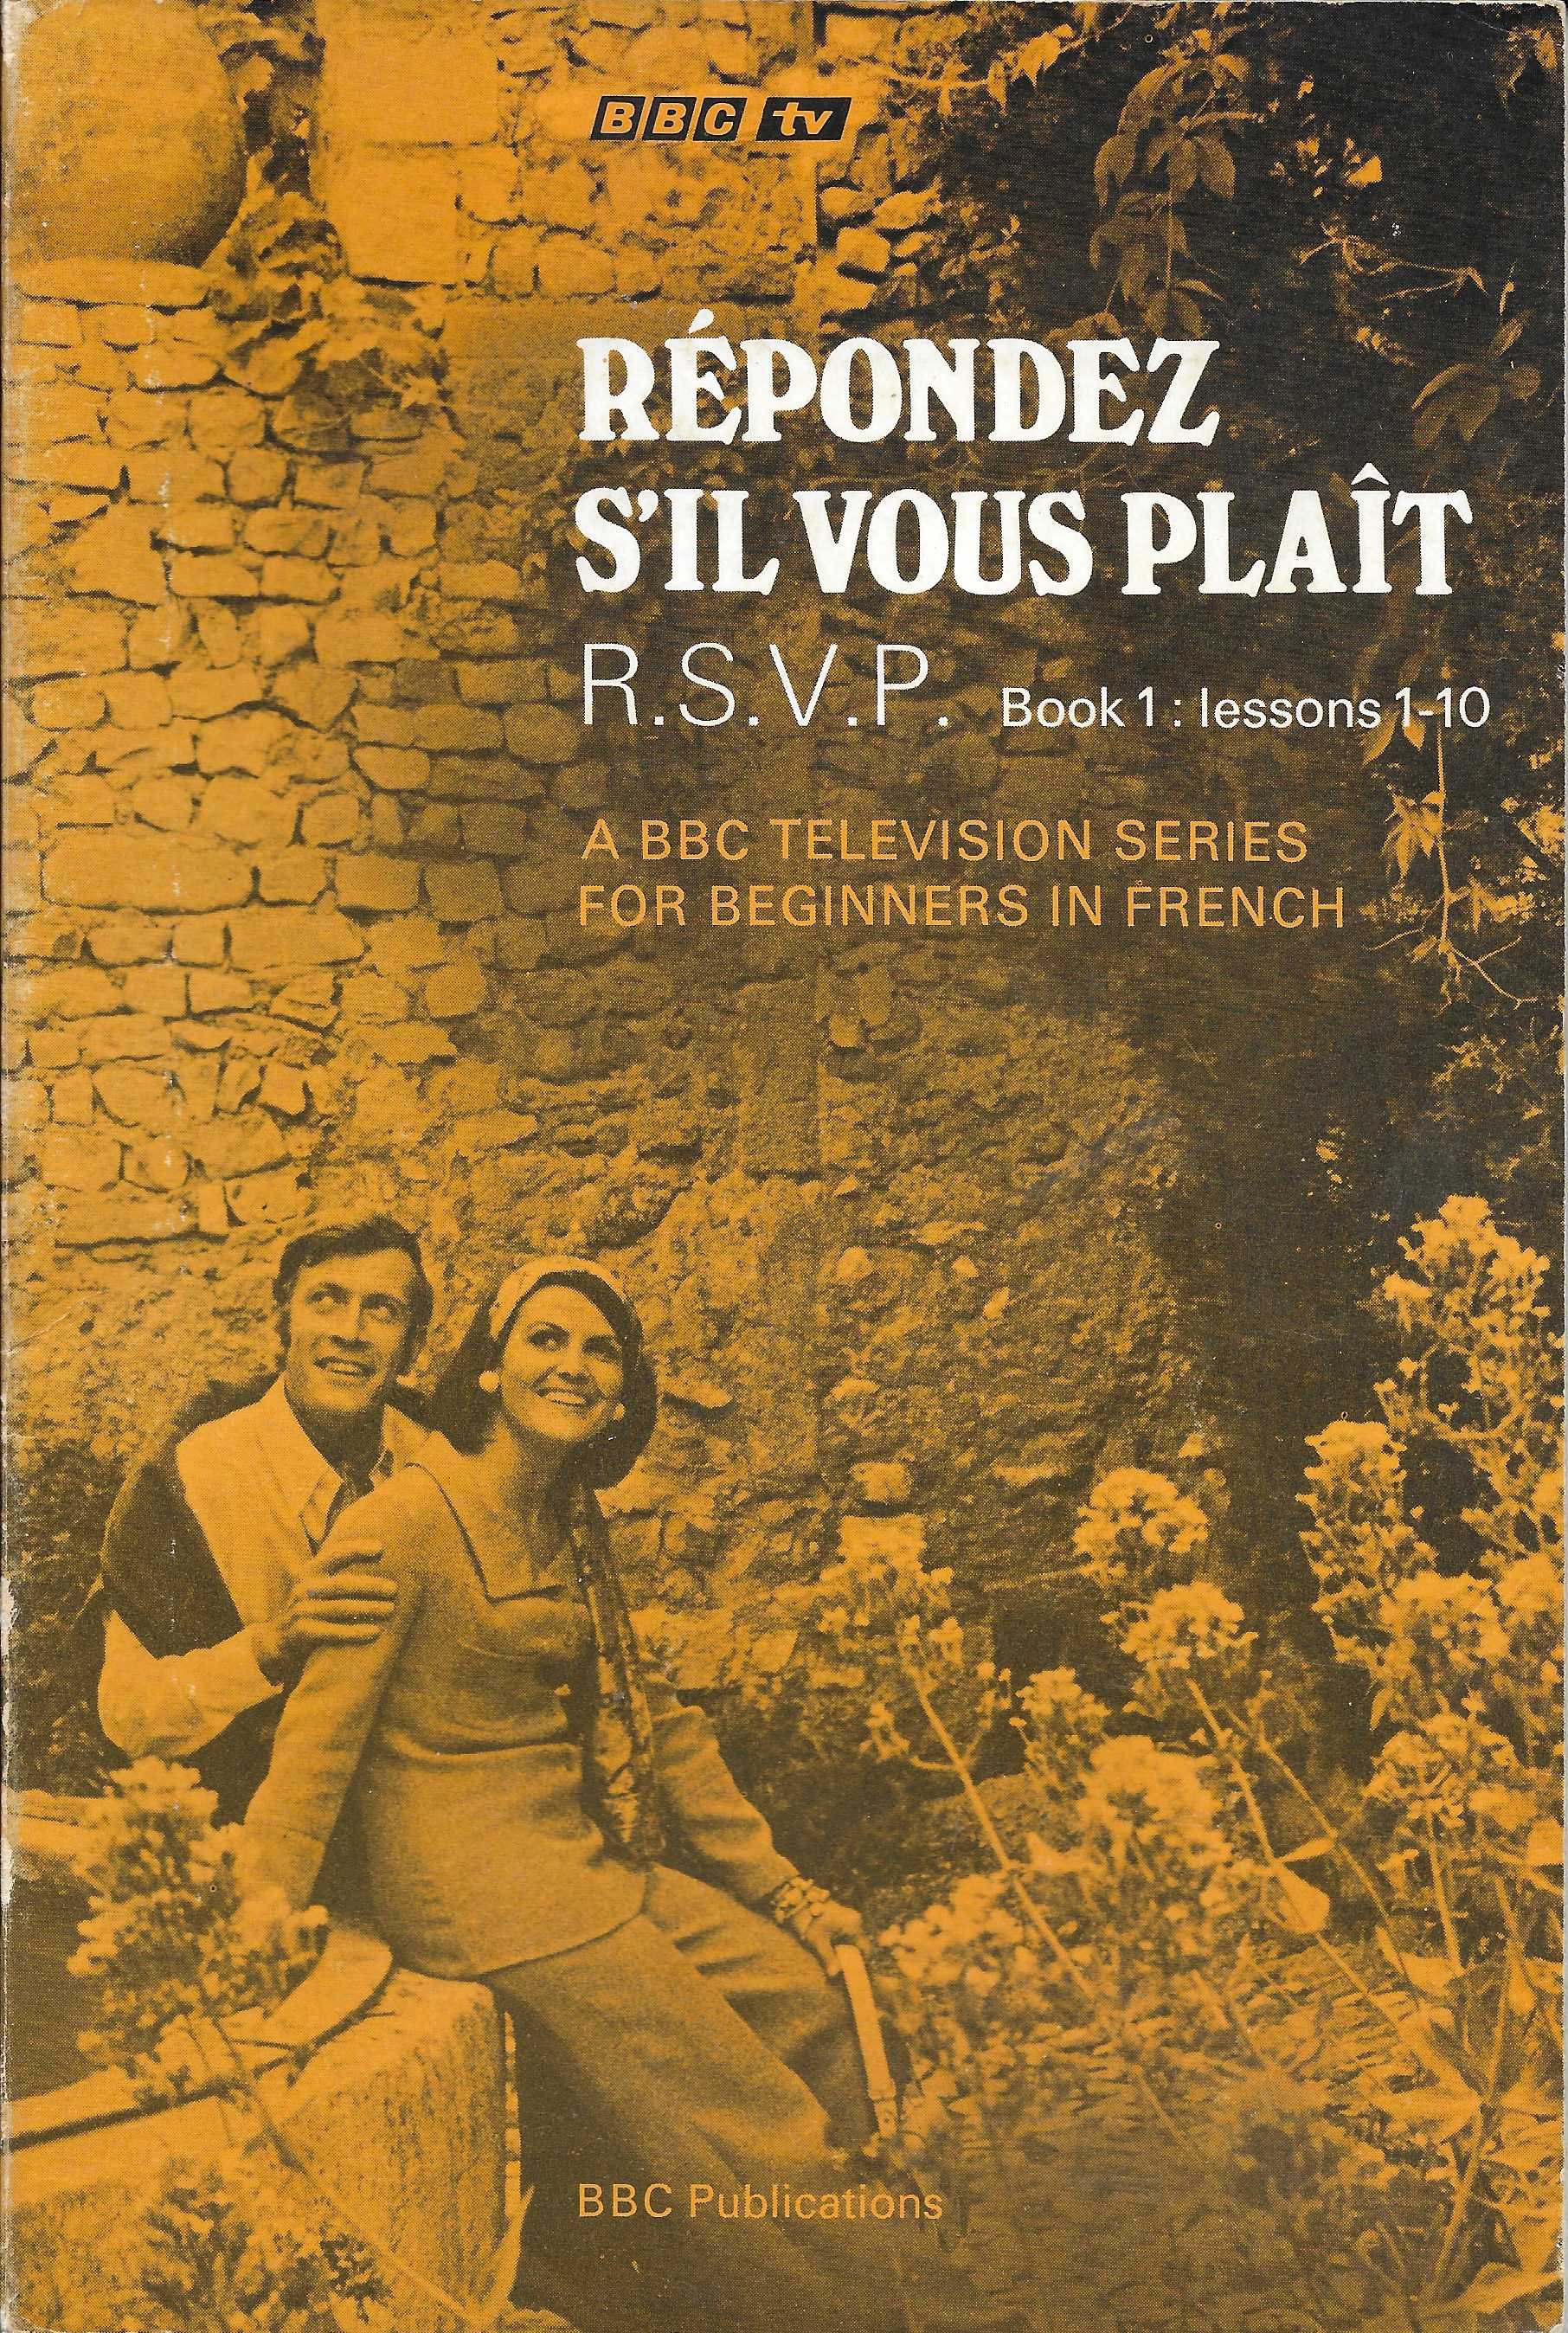 Picture of Respondez s'il vous plait R. S. V. P. - Lessons 1 - 10 by artist Max Bellancourt / Joseph Cremona from the BBC books - Records and Tapes library